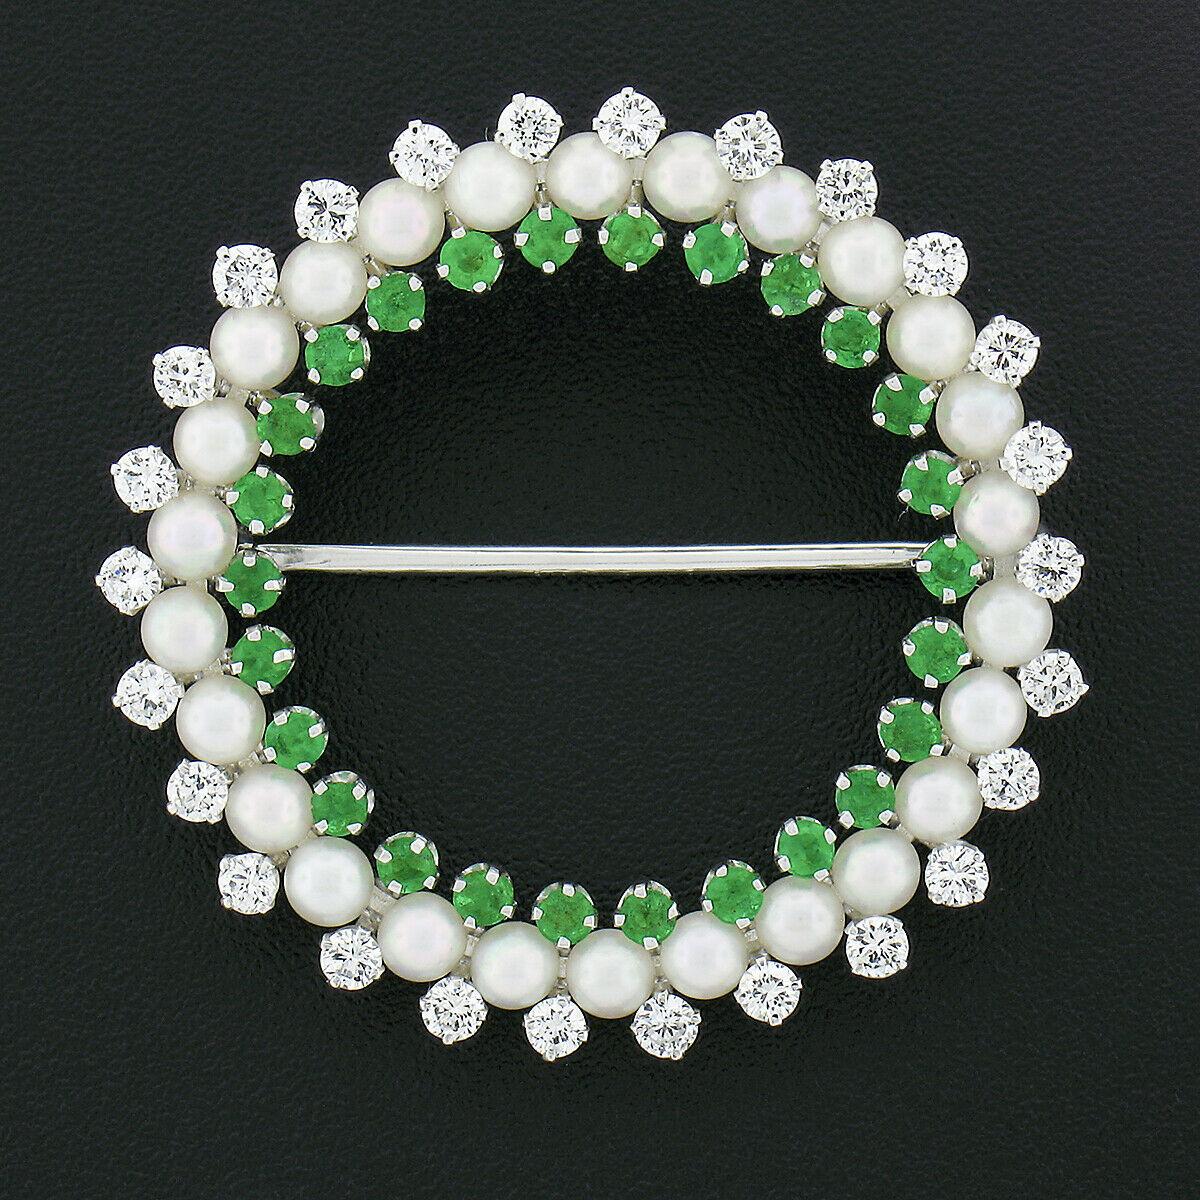 Here we have a truly marvelous vintage wreath pin brooch that was well crafted from solid 14k white gold. This incredible brooch consists of fine diamonds, emeralds, and pearls that are neatly set granting a very classy and elegant design. The inner